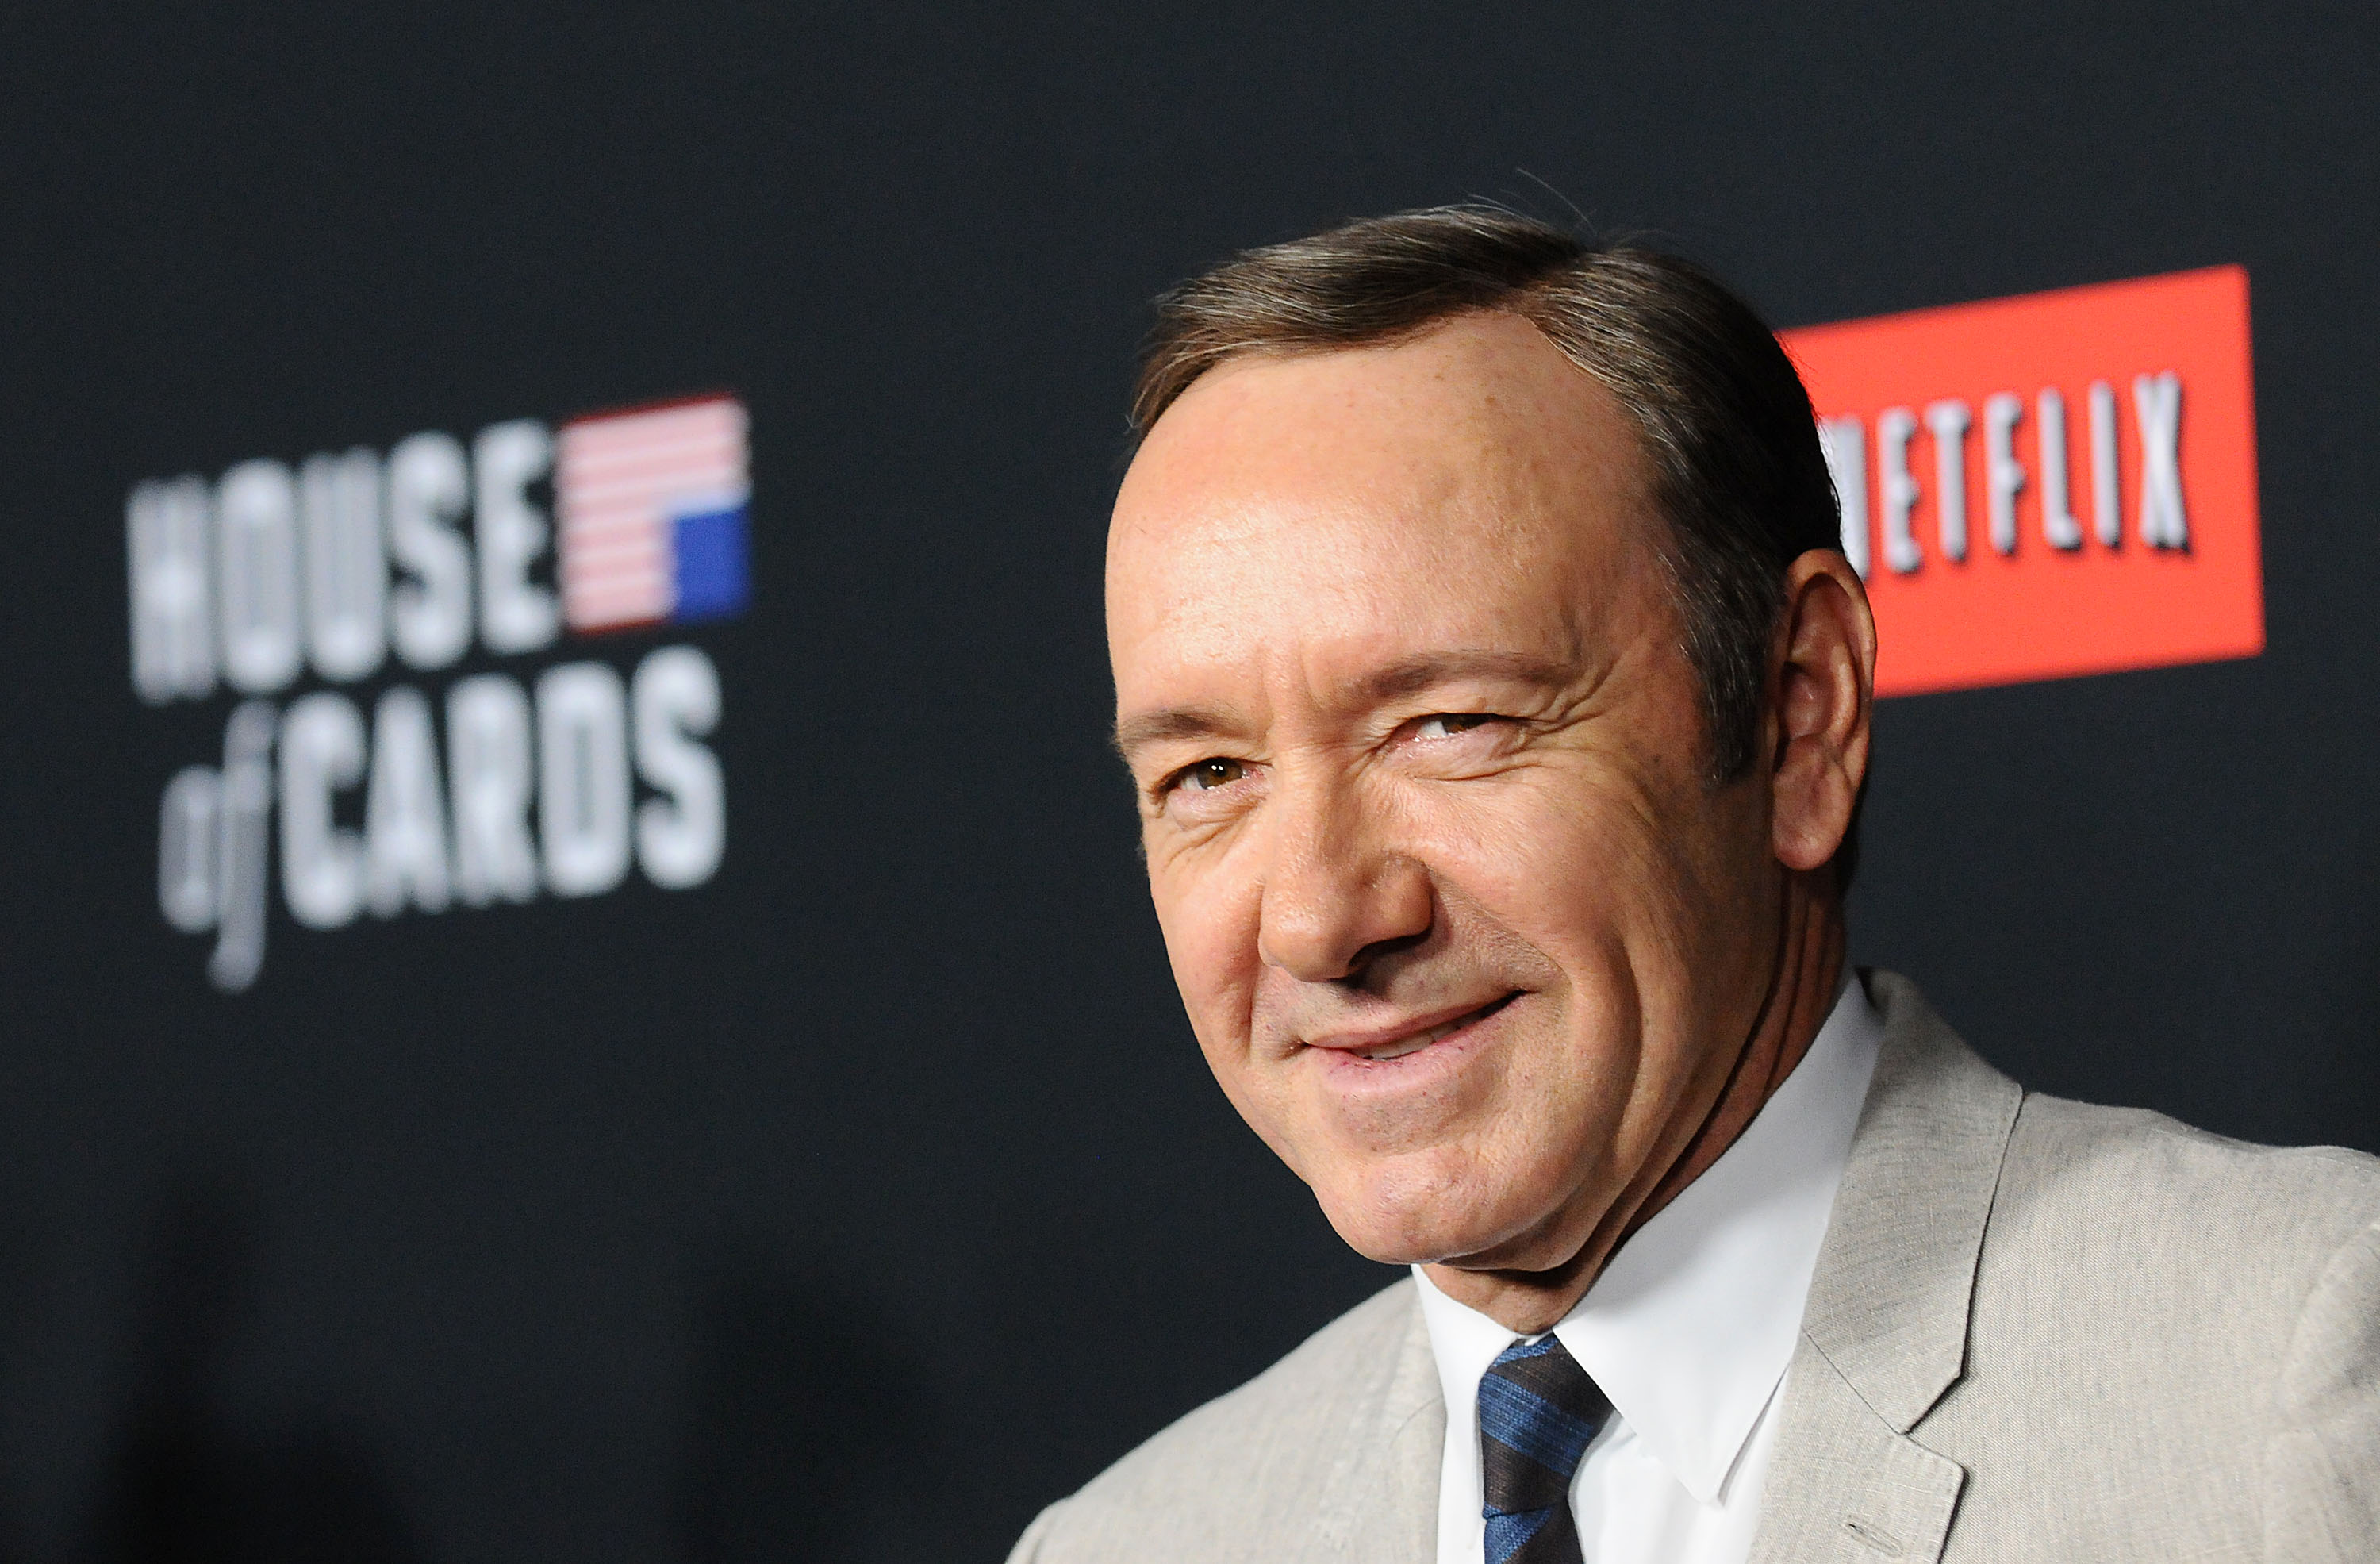 Actor Kevin Spacey attends a screening of "House Of Cards" at Directors Guild Of America on February 13, 2014 in Los Angeles, California. (Jason LaVeris&mdash;FilmMagic)